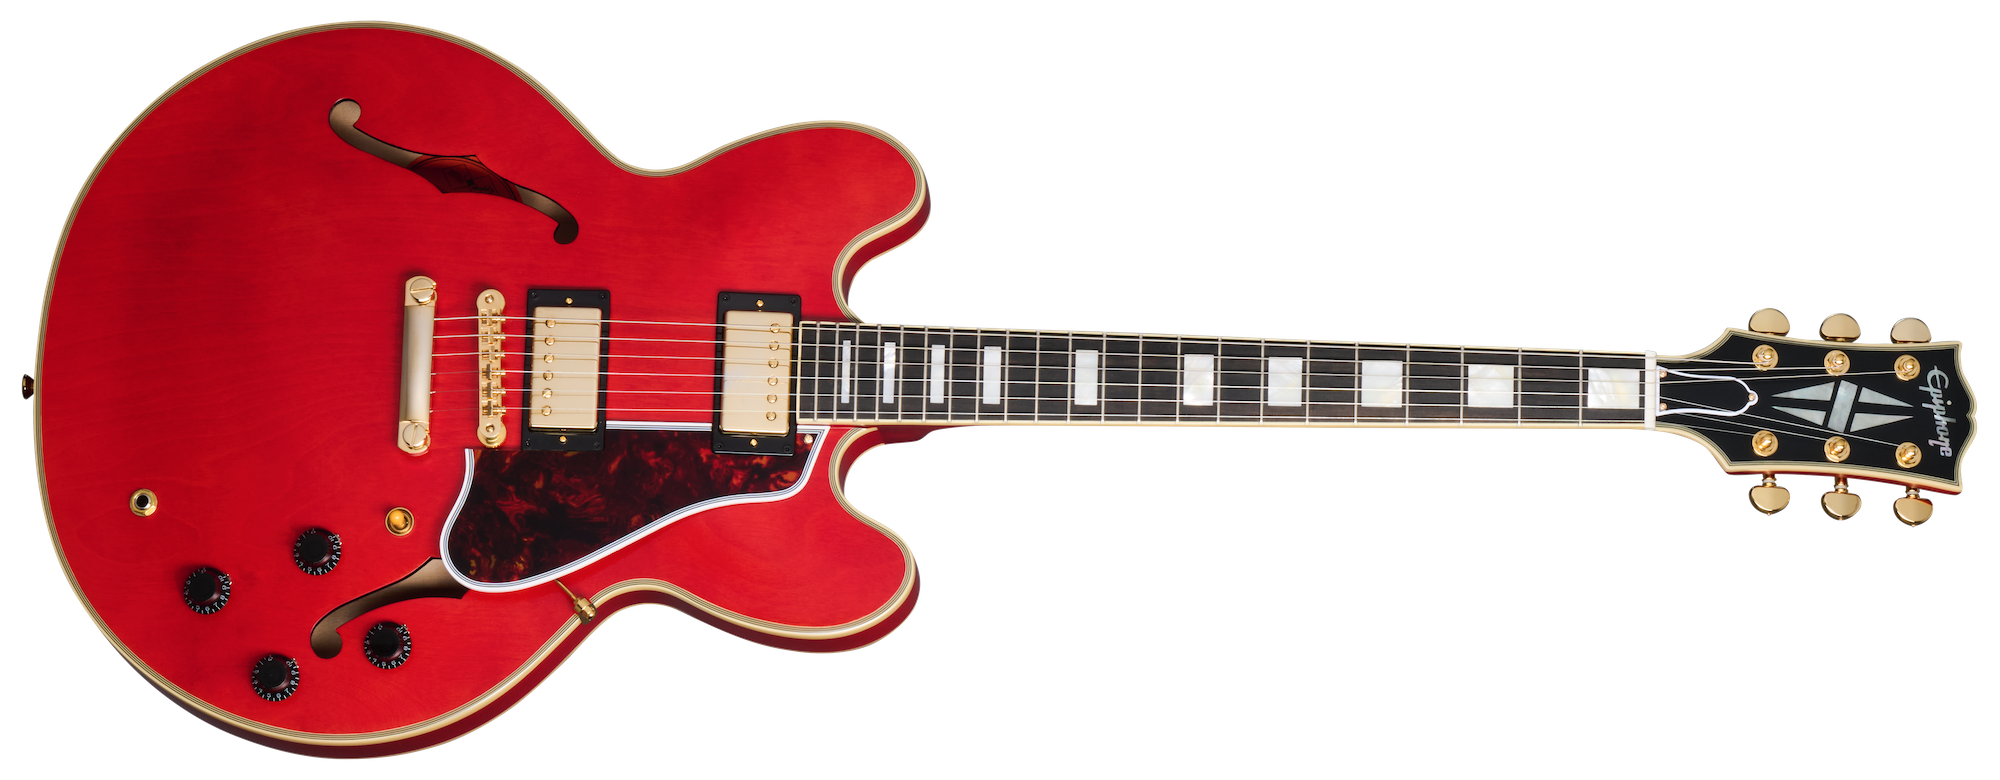 1959 ES-355 (Incl. Hard Case) Cherry Red